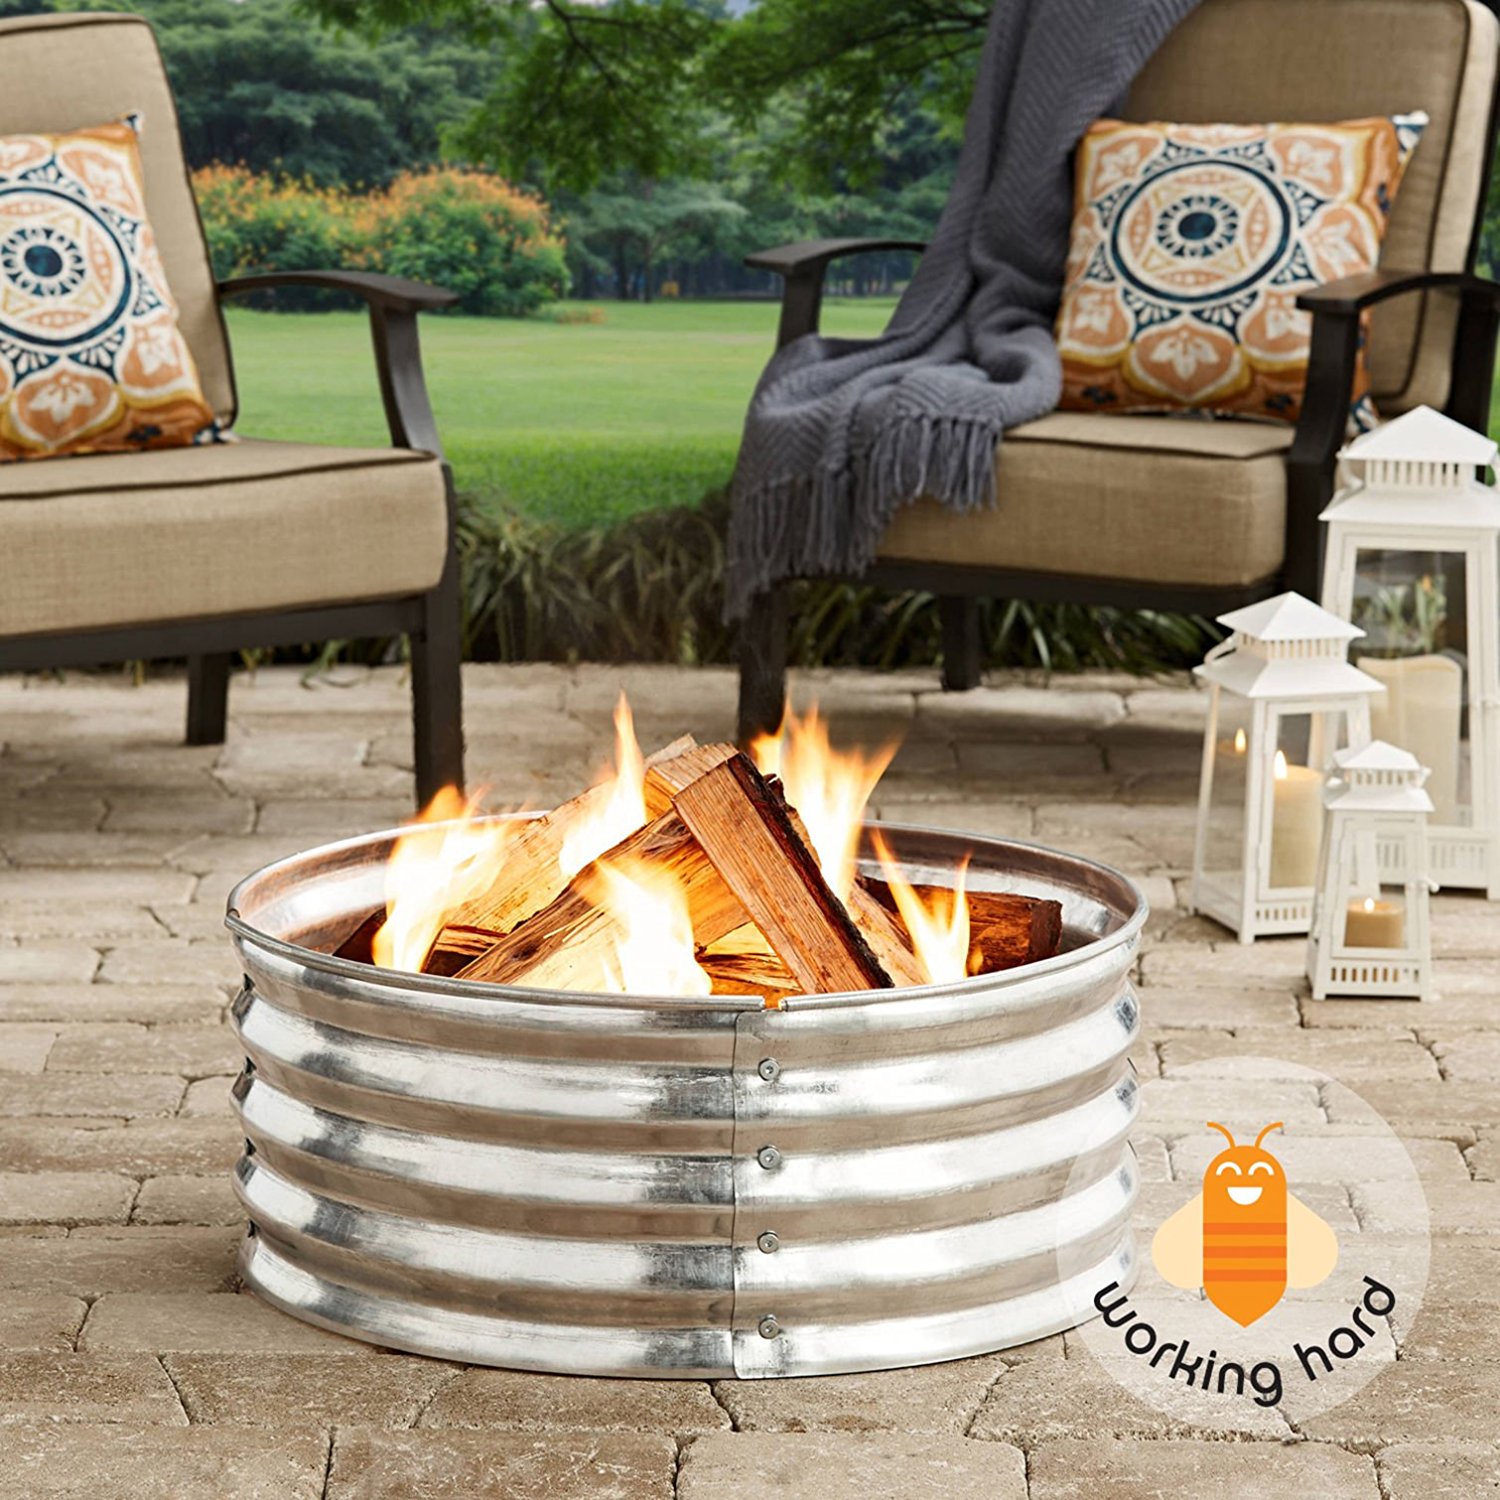 Titan Flame Rv Fireplace Unique Cheap 36 Fire Ring Find 36 Fire Ring Deals On Line at